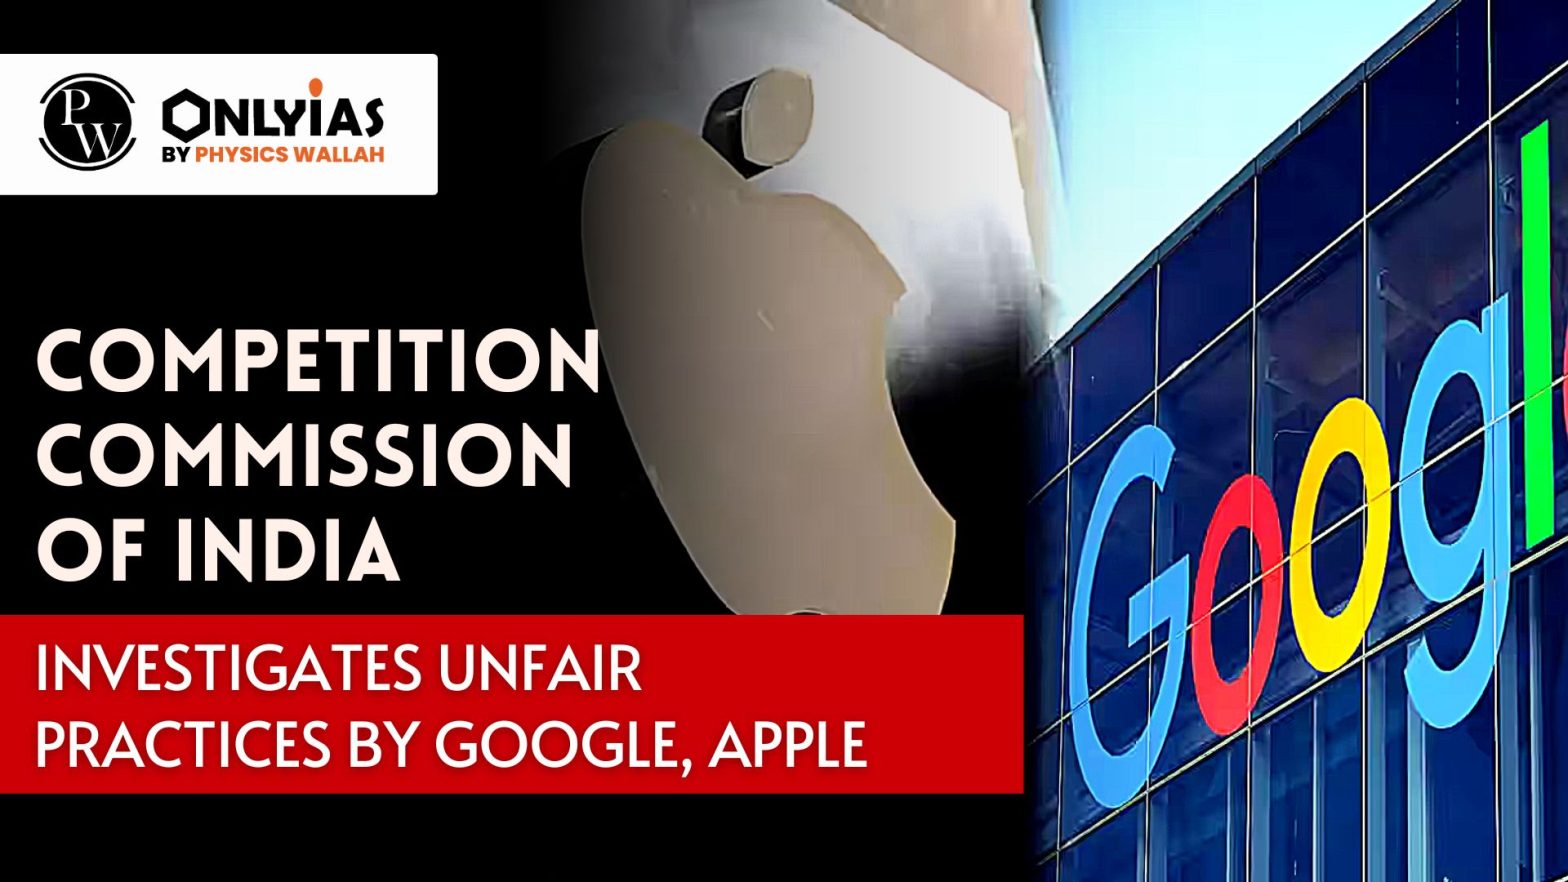 Competition Commission Of India Investigates Unfair Practices by Google, Apple